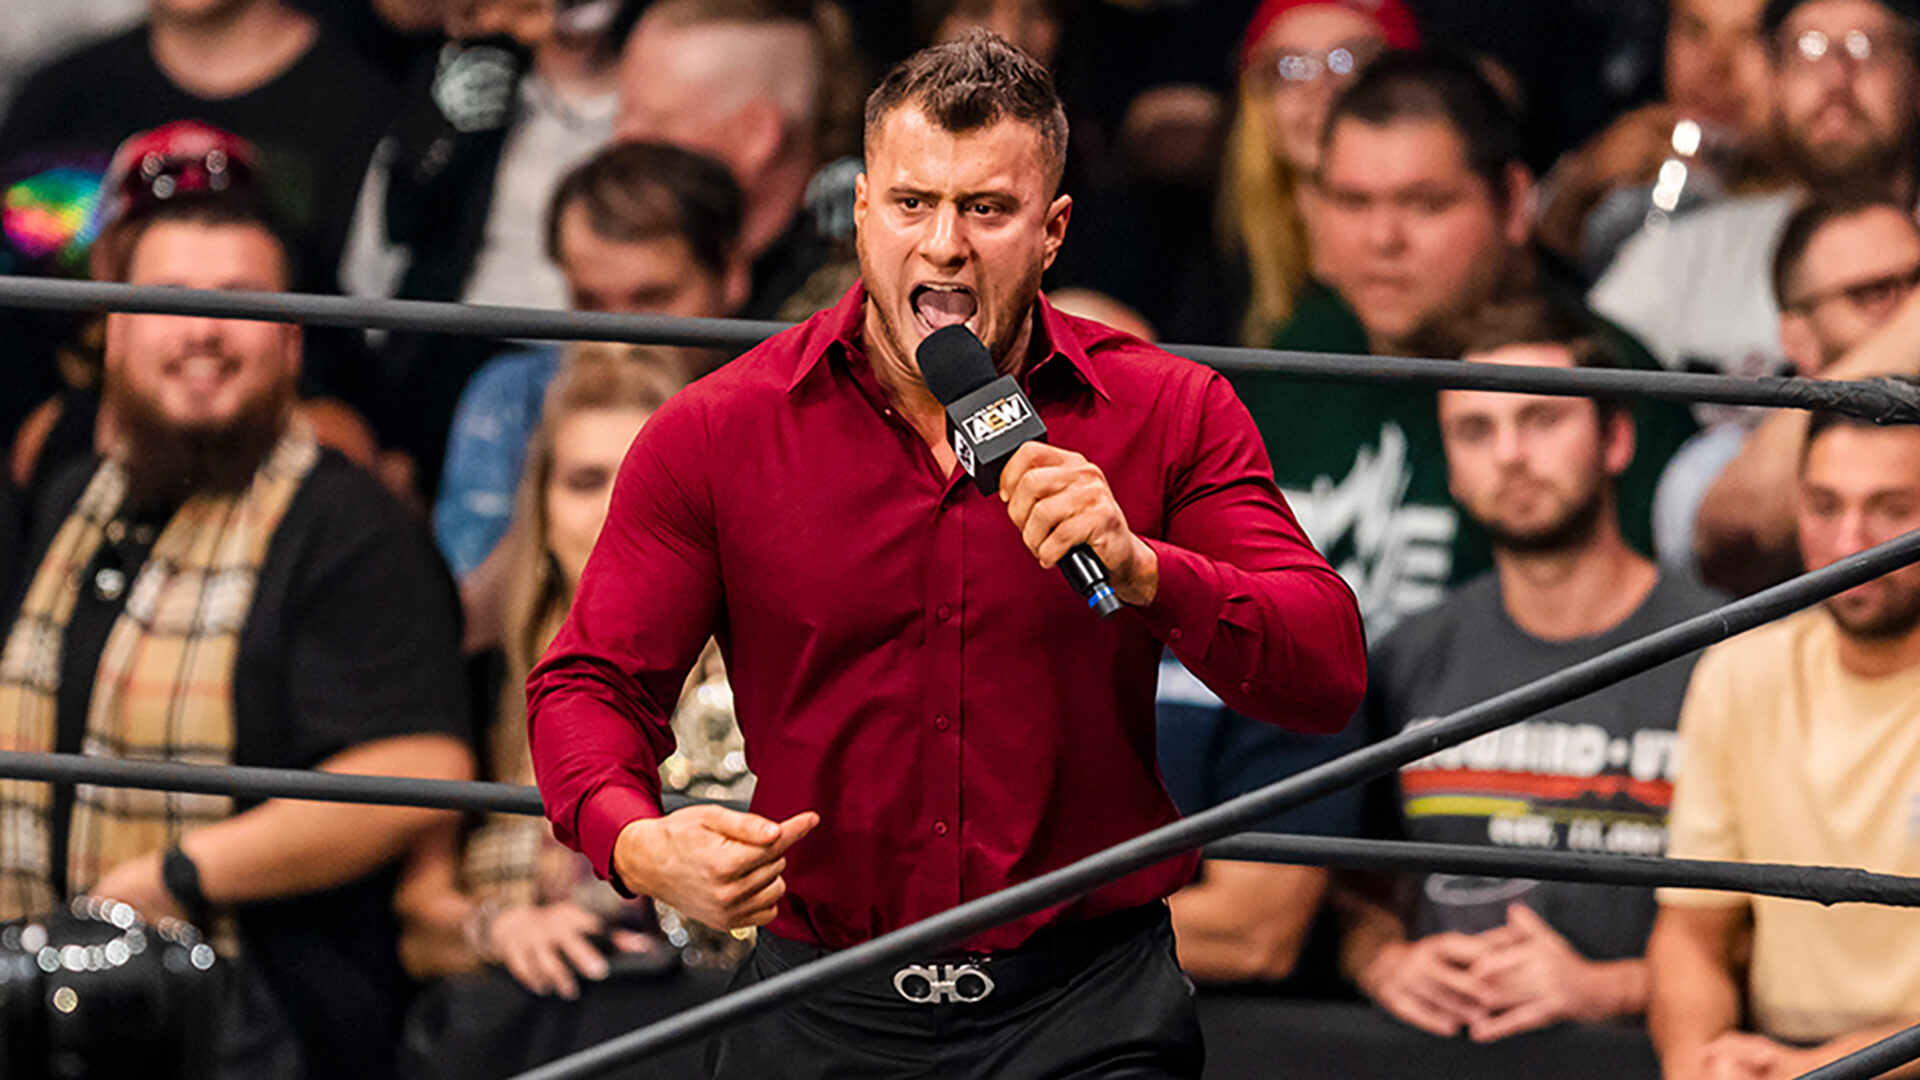 MJF's Worked Shoot Promo On AEW Dynamite, CM Punk Confronted MJF Off Air